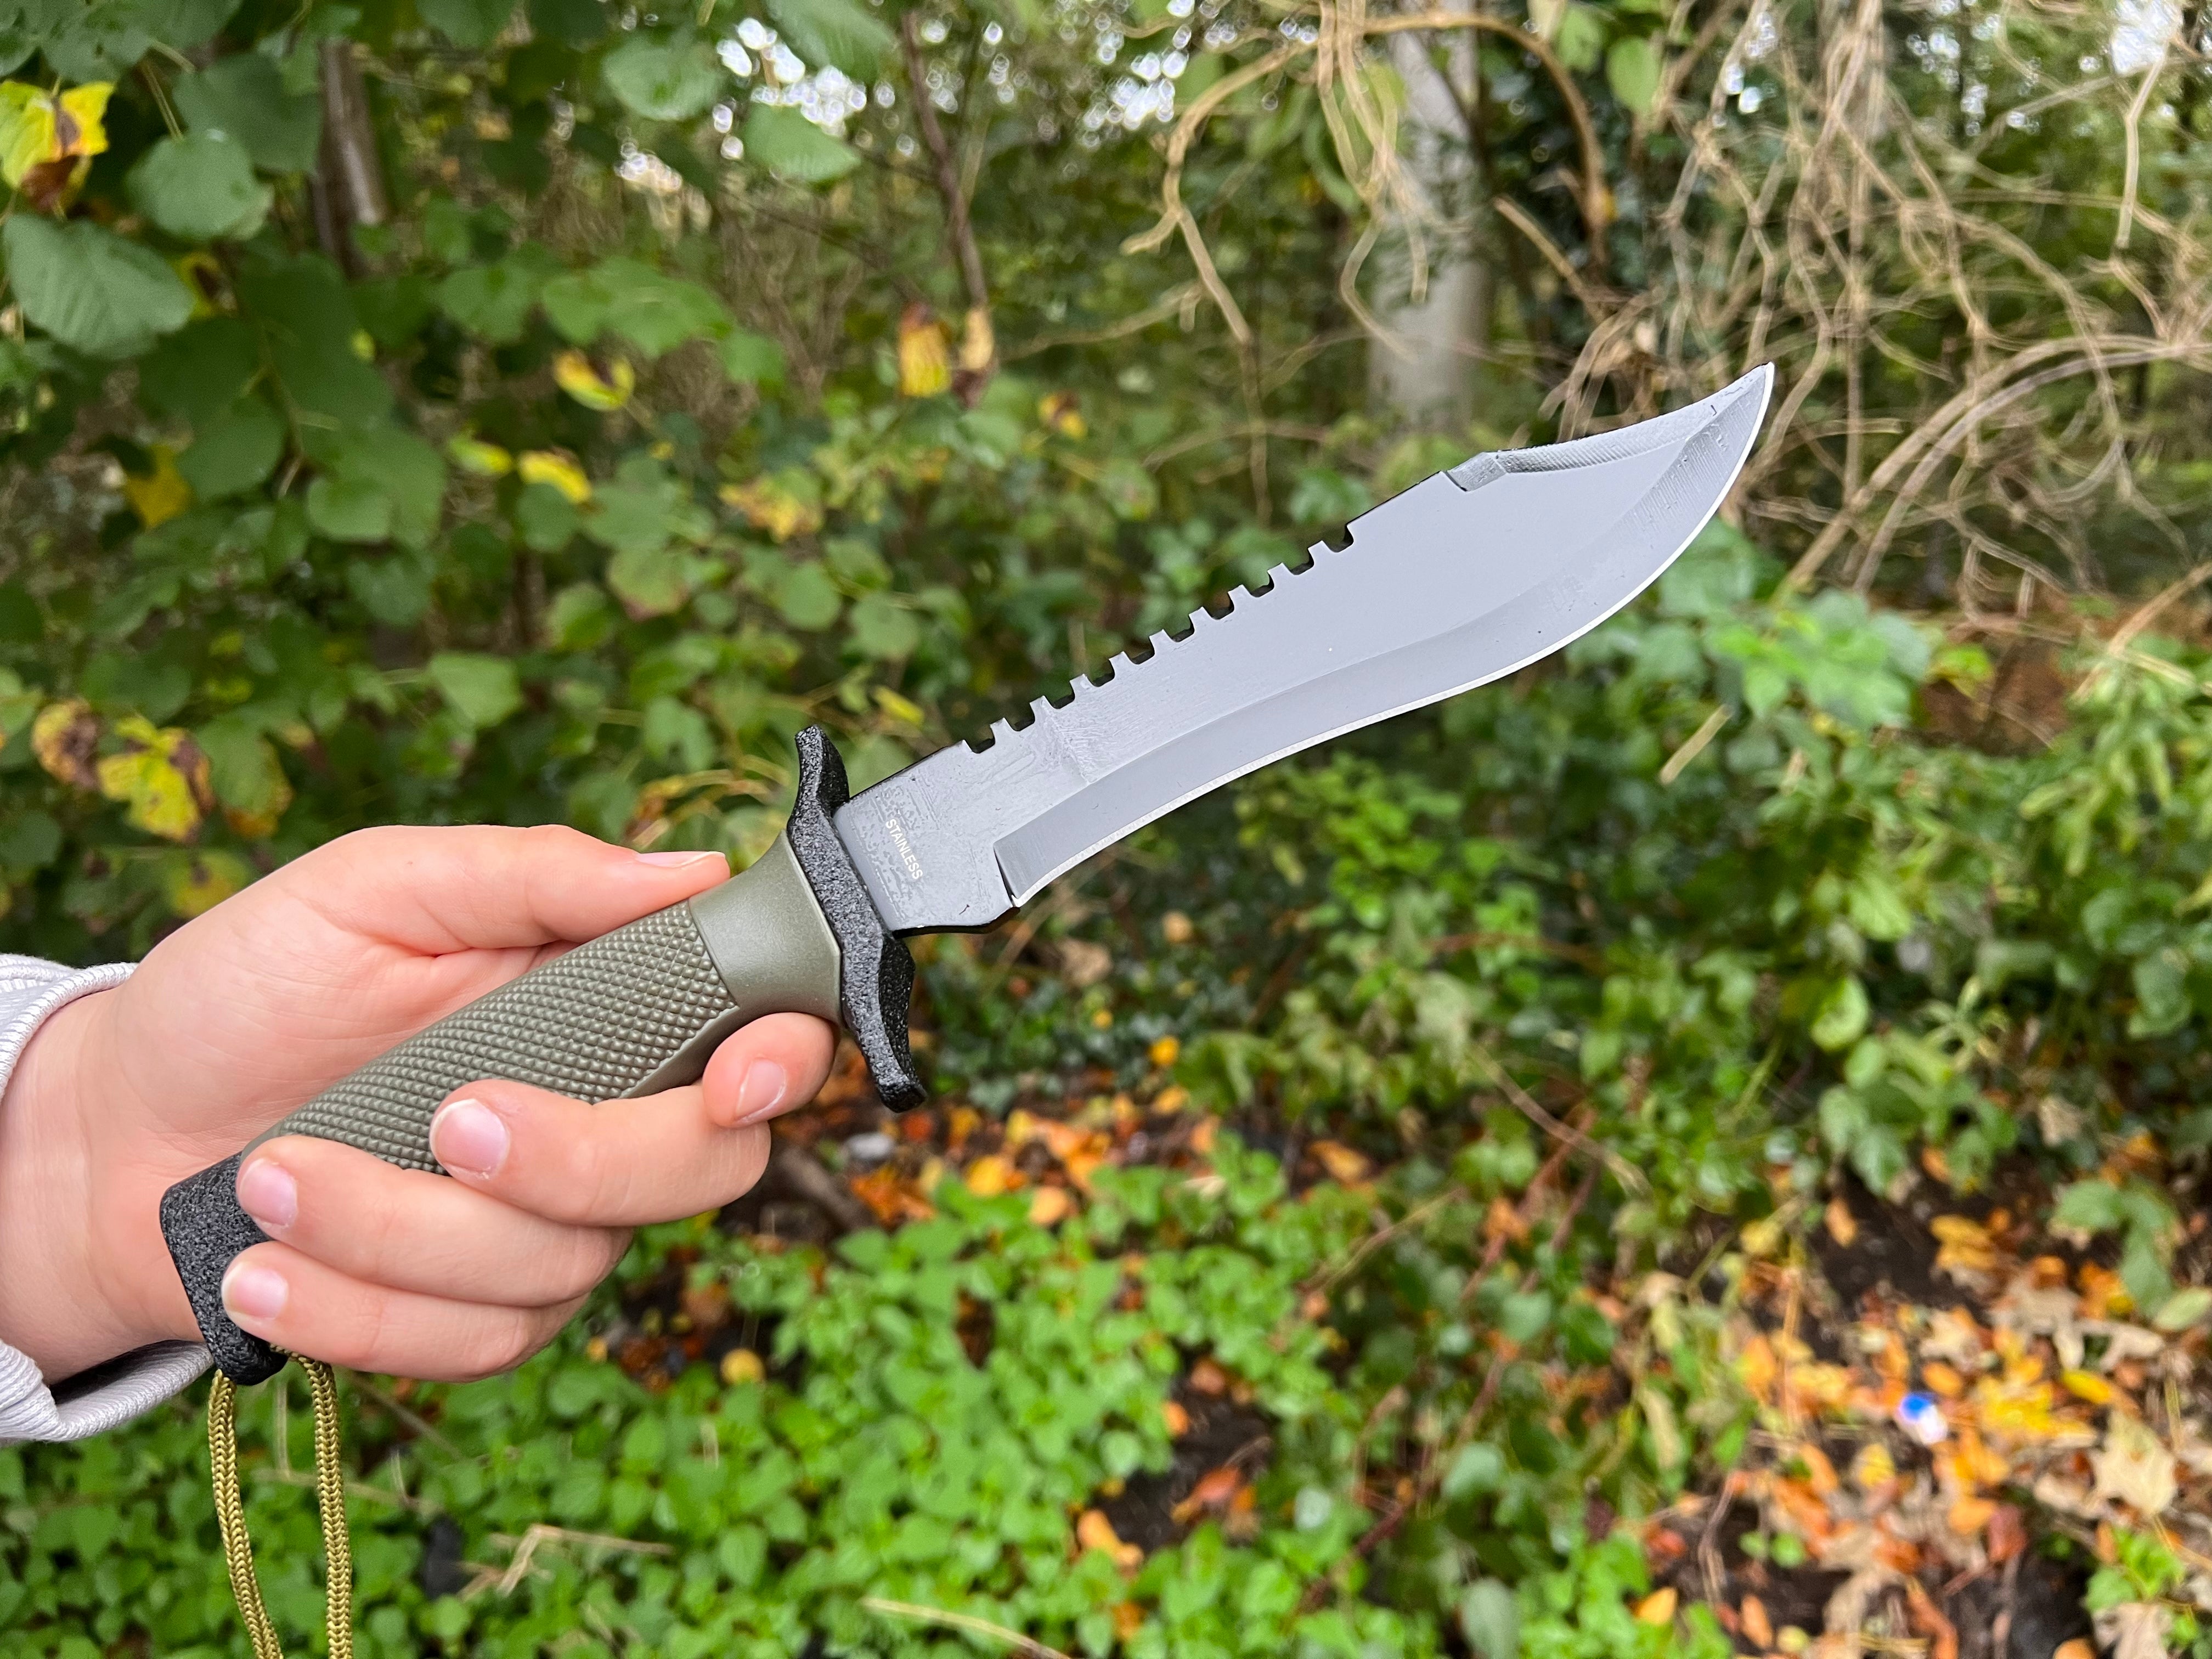 Survival knife "Rambo Tactical"-outdoor companion with hard anodizing and rigid holster